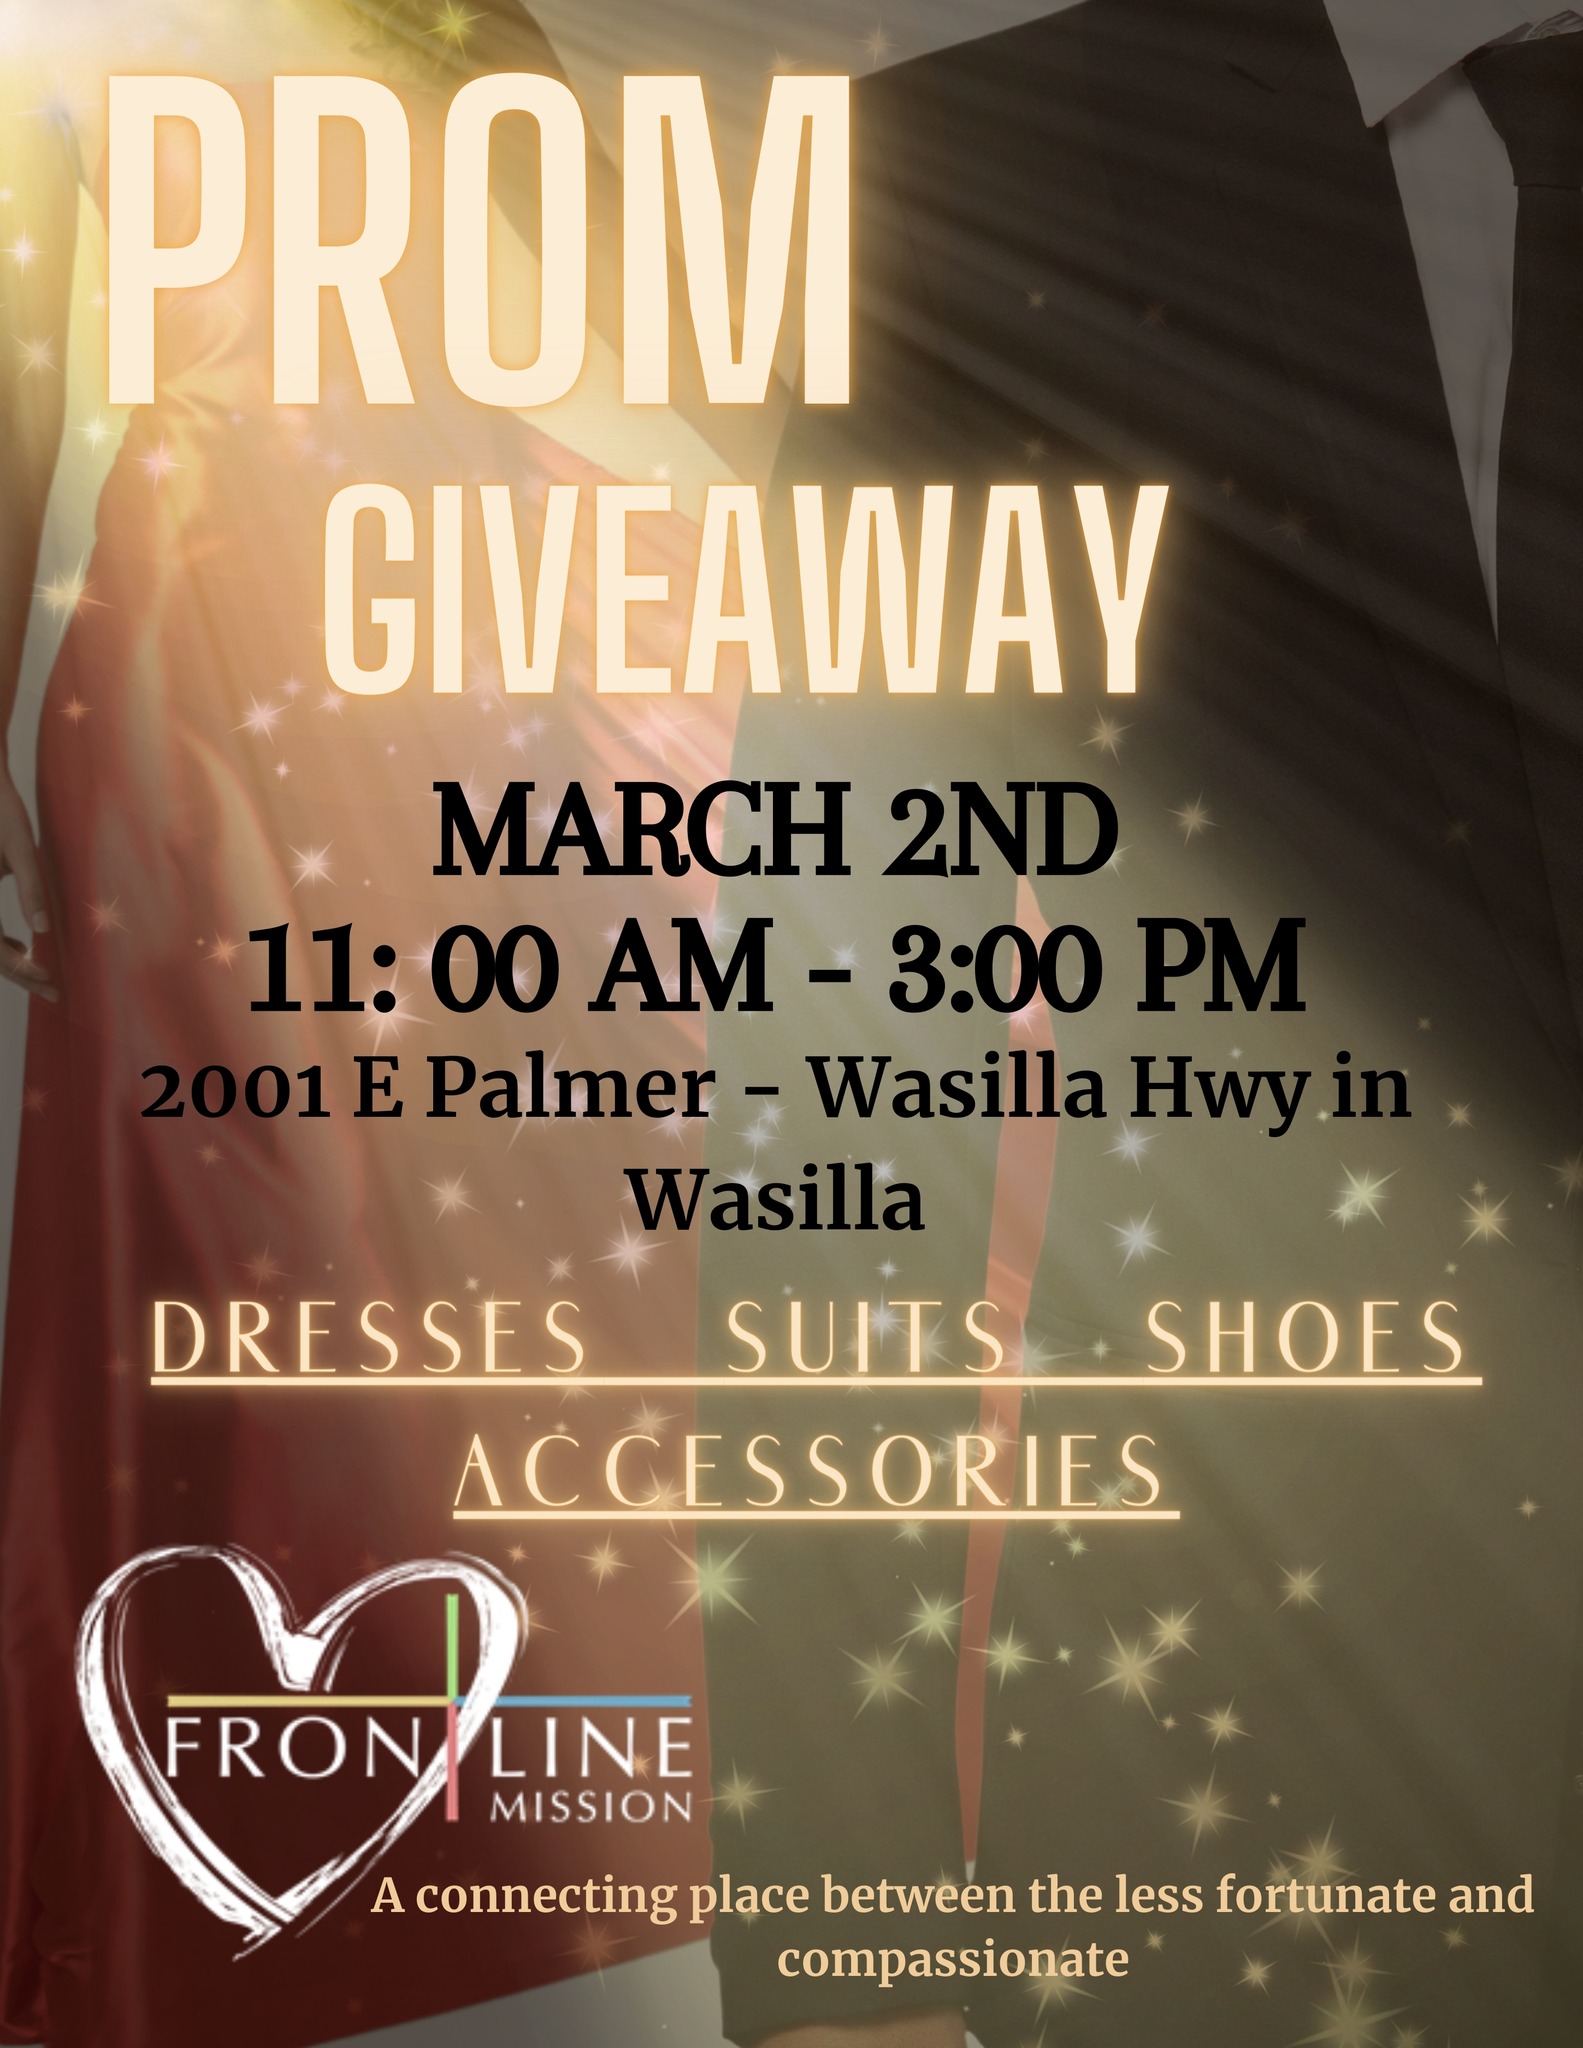 Frontline Mission's Prom Giveaway